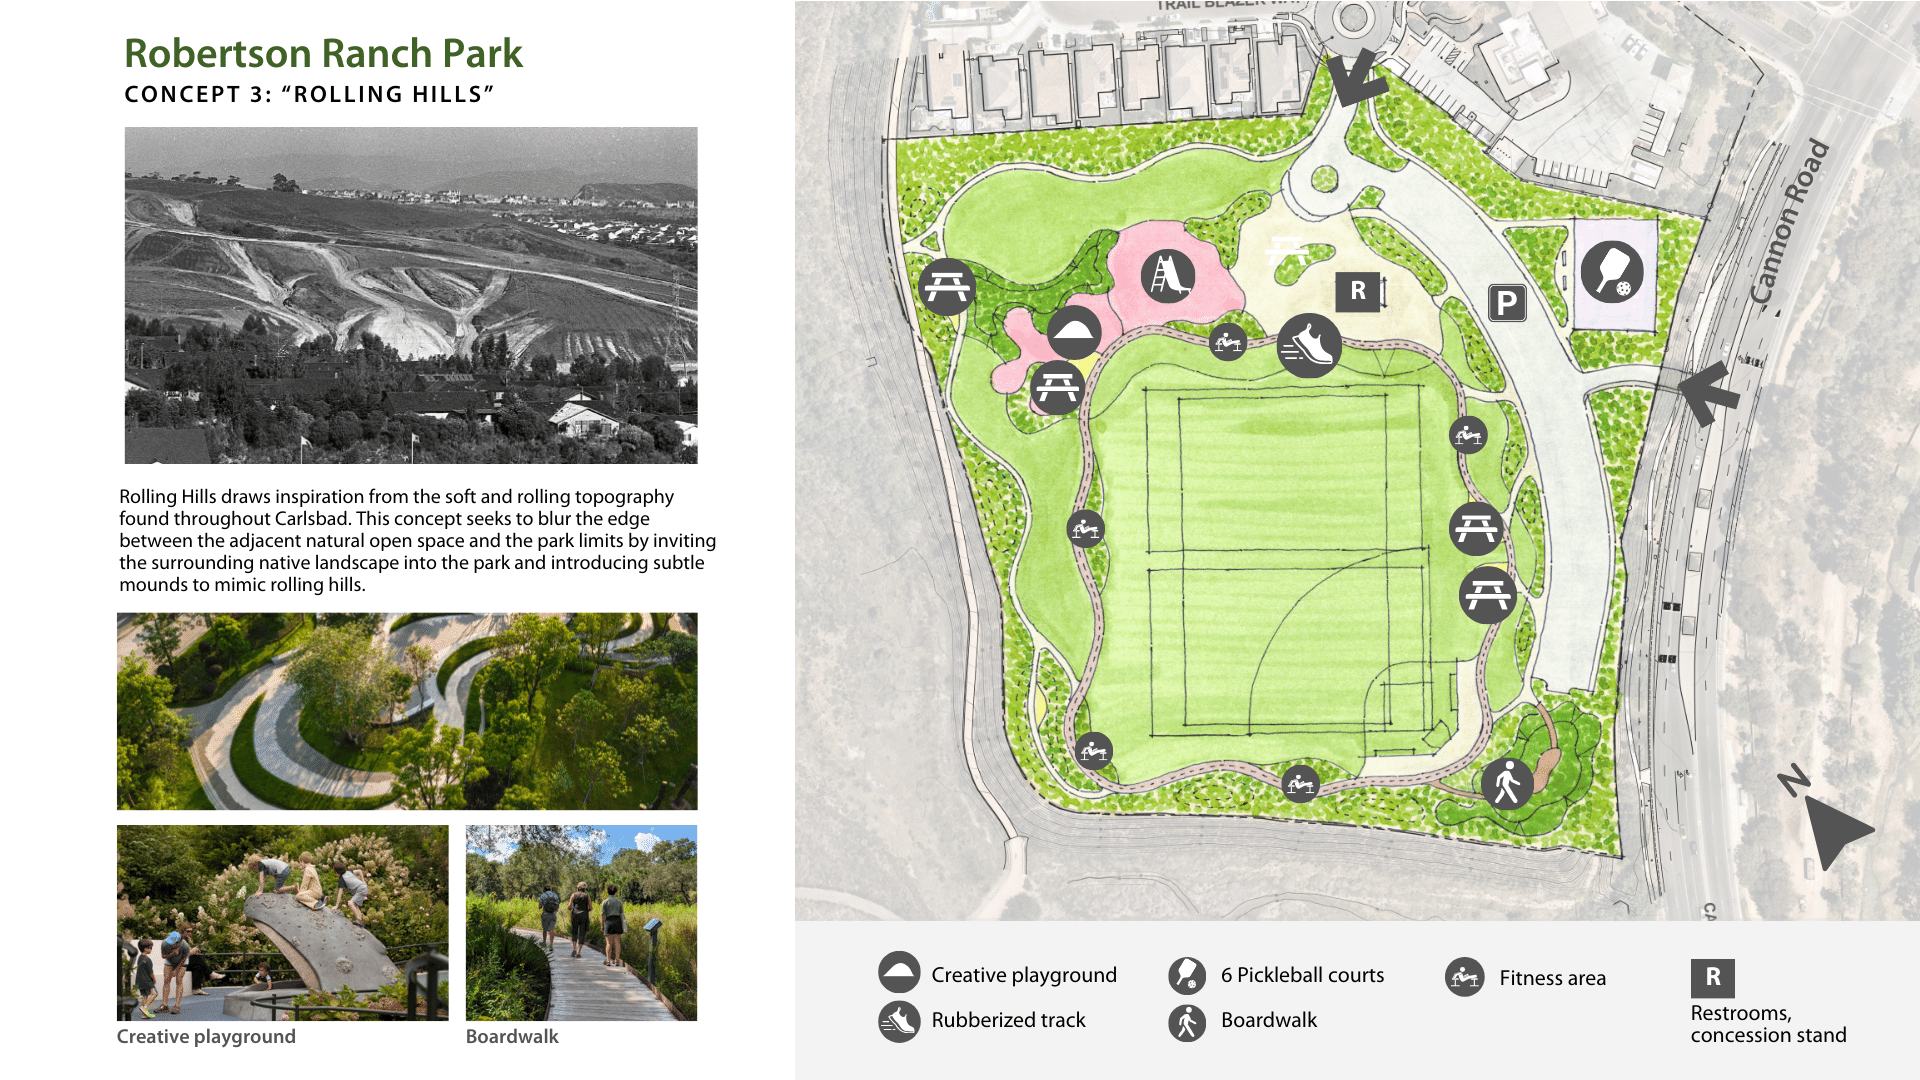 An at a glance view shows the primary features and amenities of the Rolling Hills park design concept and some inspiration imagery.